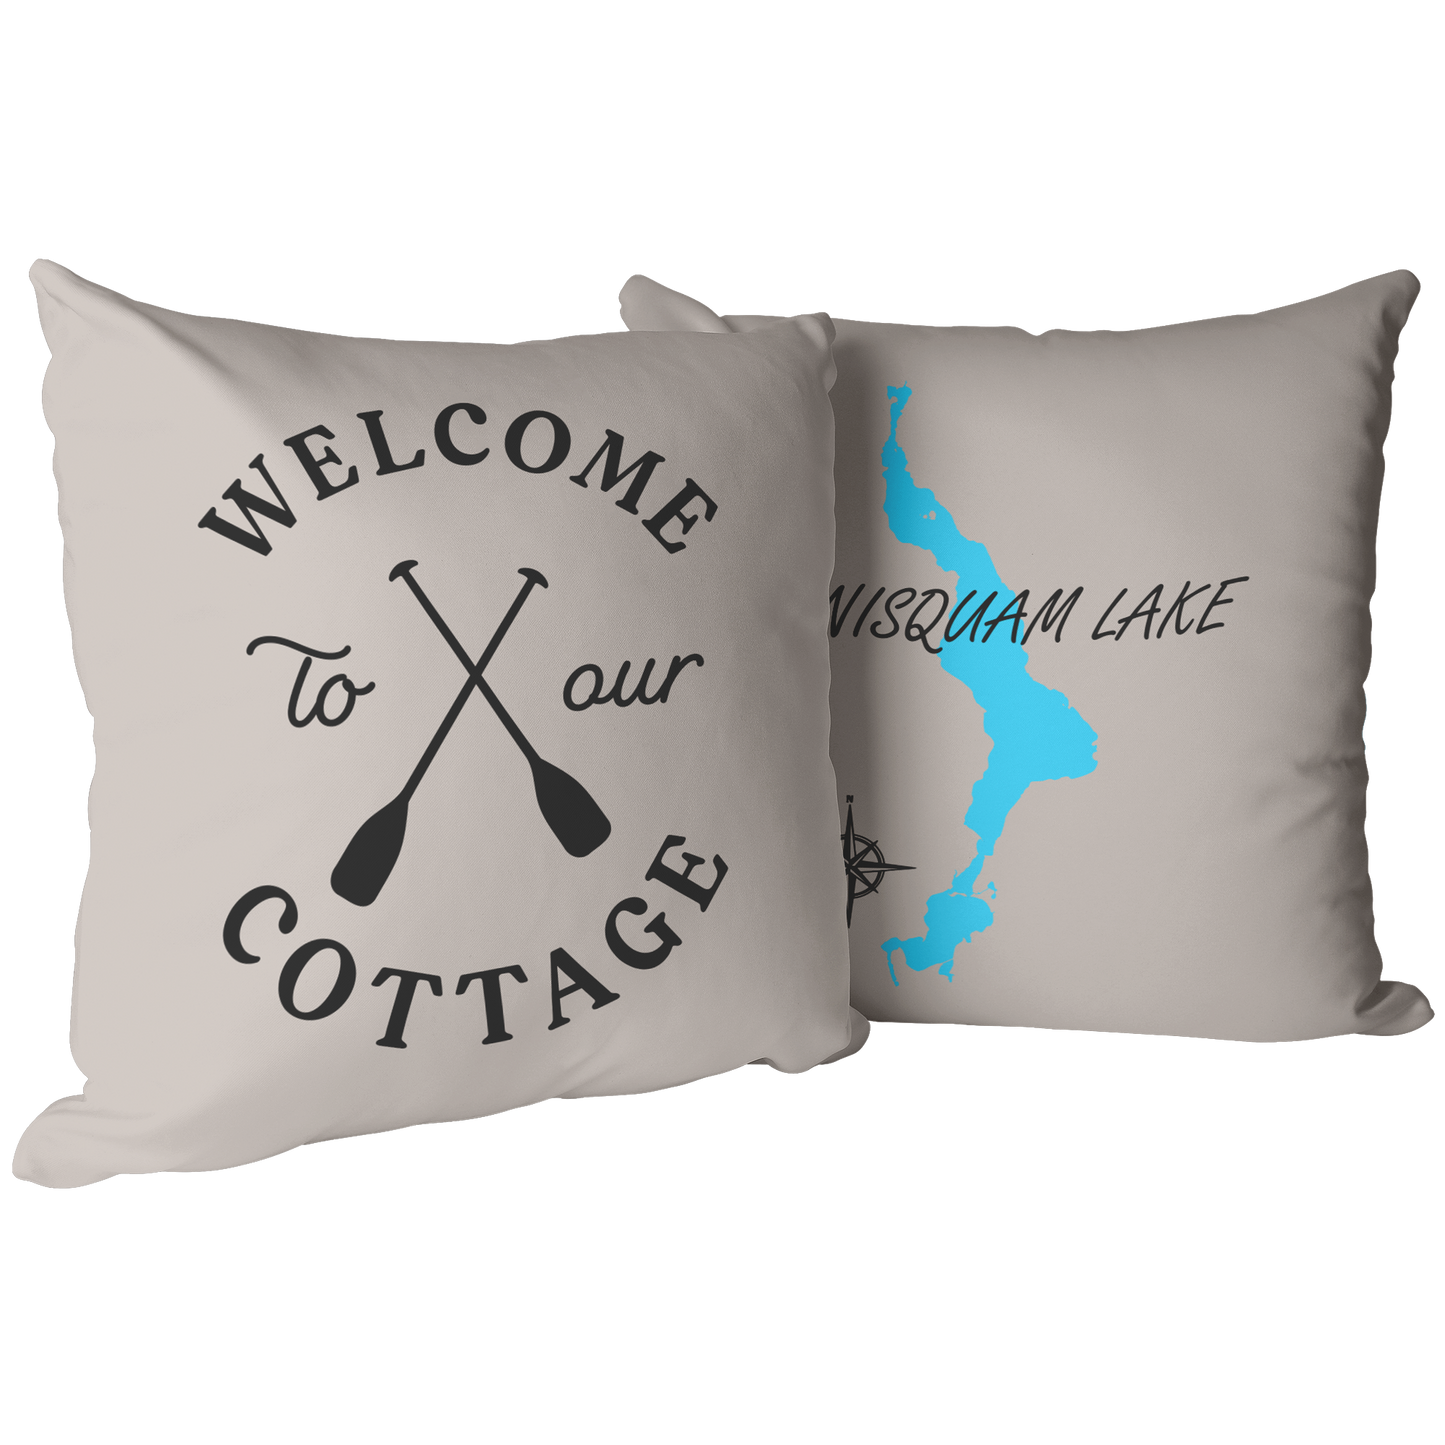 Welcome to our cottage custom pillow featuring Winnisquam Lake, NY